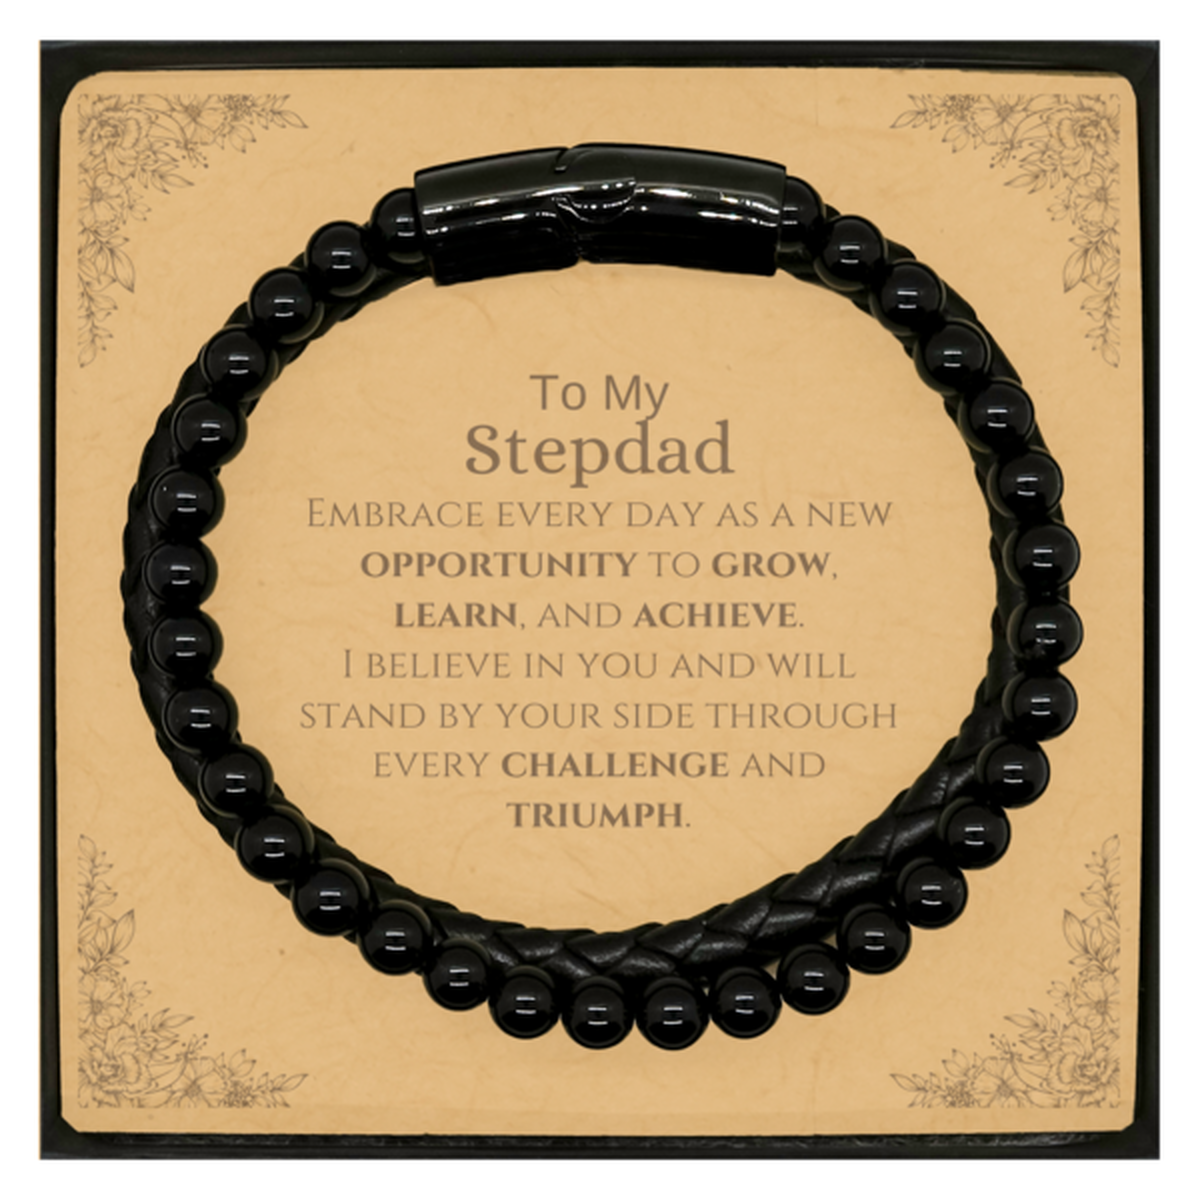 To My Stepdad Gifts, I believe in you and will stand by your side, Inspirational Stone Leather Bracelets For Stepdad, Birthday Christmas Motivational Stepdad Gifts